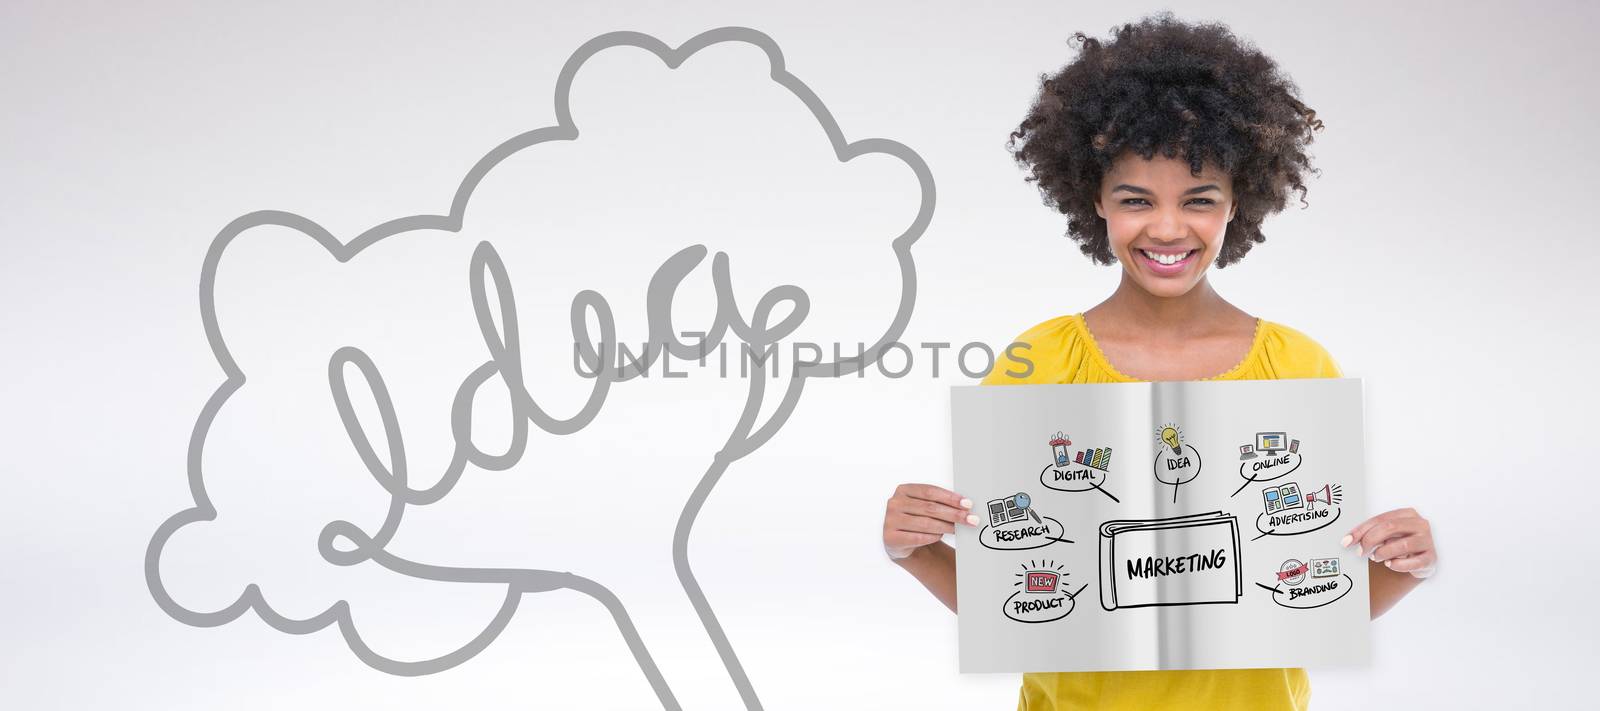 Pretty girl showing a book against grey background